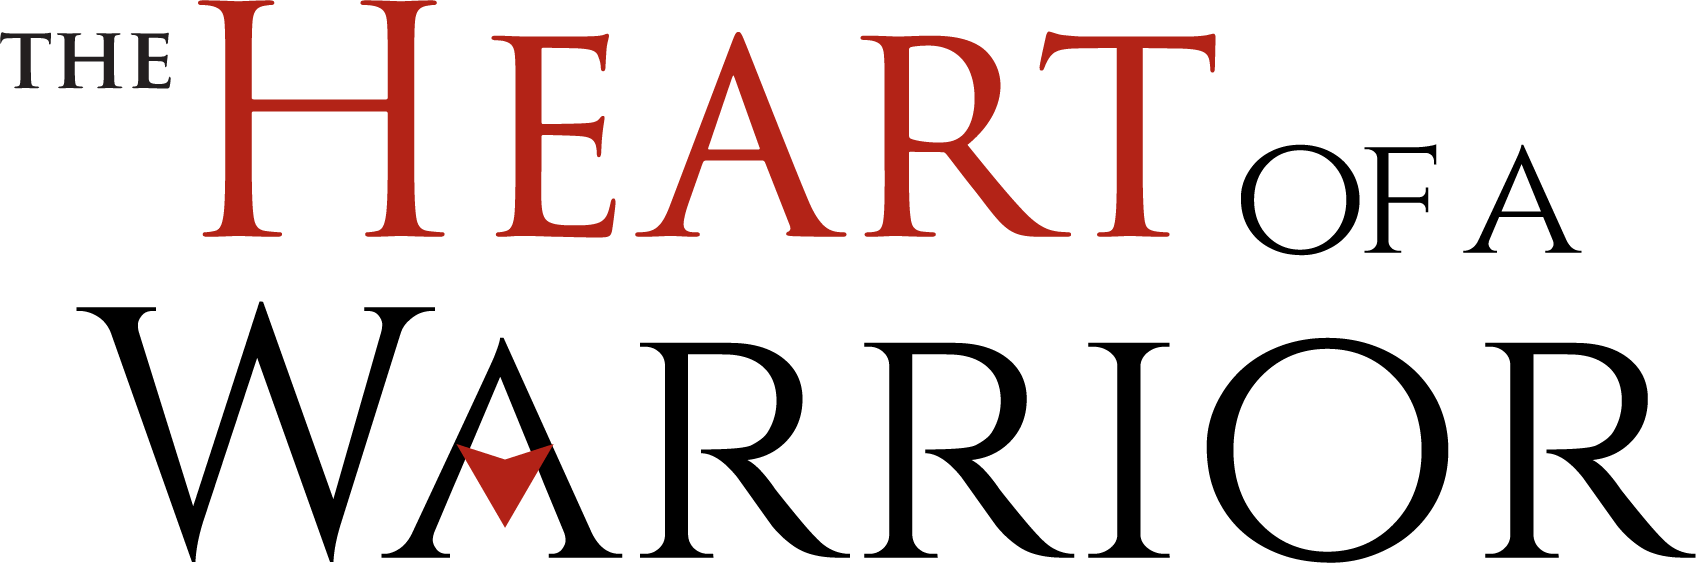 The Heart of a Warrior - Wikipedia